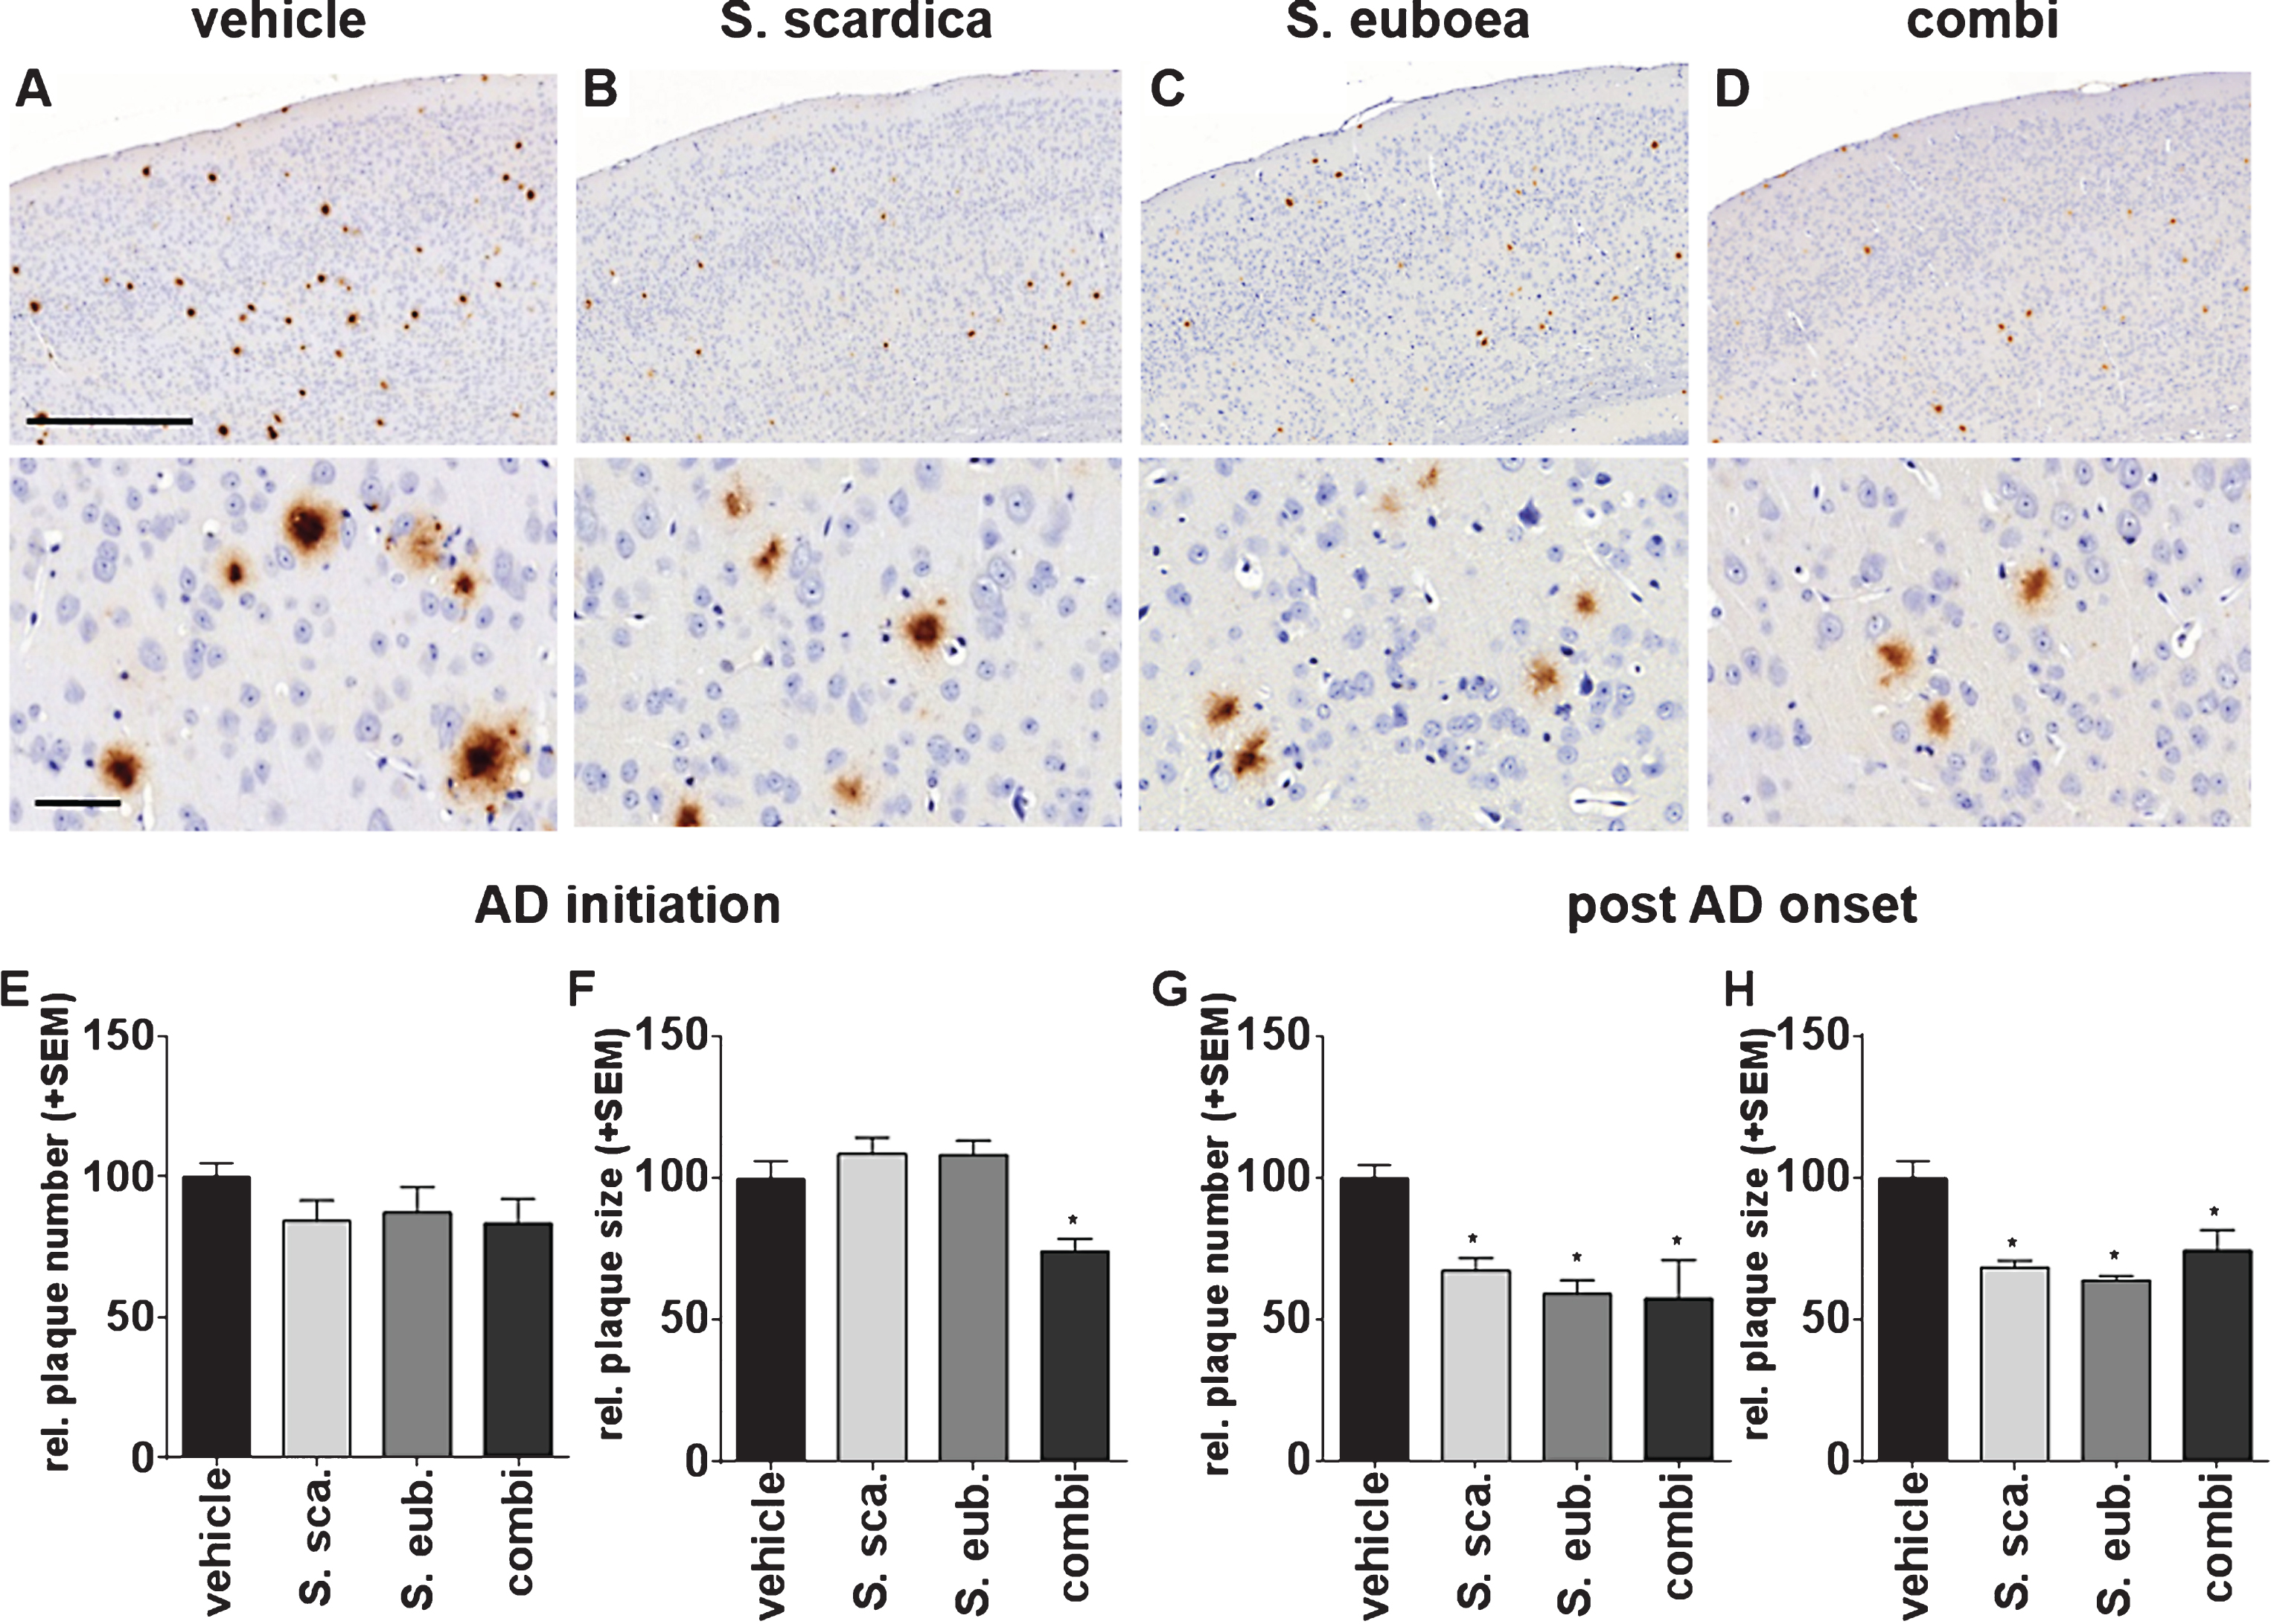 Sideritis spp. extracts restrict Aβ plaque deposition and growth in APP-tg mice. A-D) Exemplary microphotographs of cortical sections stained against Aβ after (A) vehicle, (B) S. scardica, (C) S. euboea, and (D) extract combination in the post-AD-onset treatment (scale bars: upper row 500μm, lower row 50μm). E, F) Sideritis spp. extract combination reduced plaque size when applied according to AD-initiation treatment strategy. G, H) post-AD-onset treatment significantly reduced both, plaque number and size in all extract groups versus controls (mean + SEM, *p≤0.05).